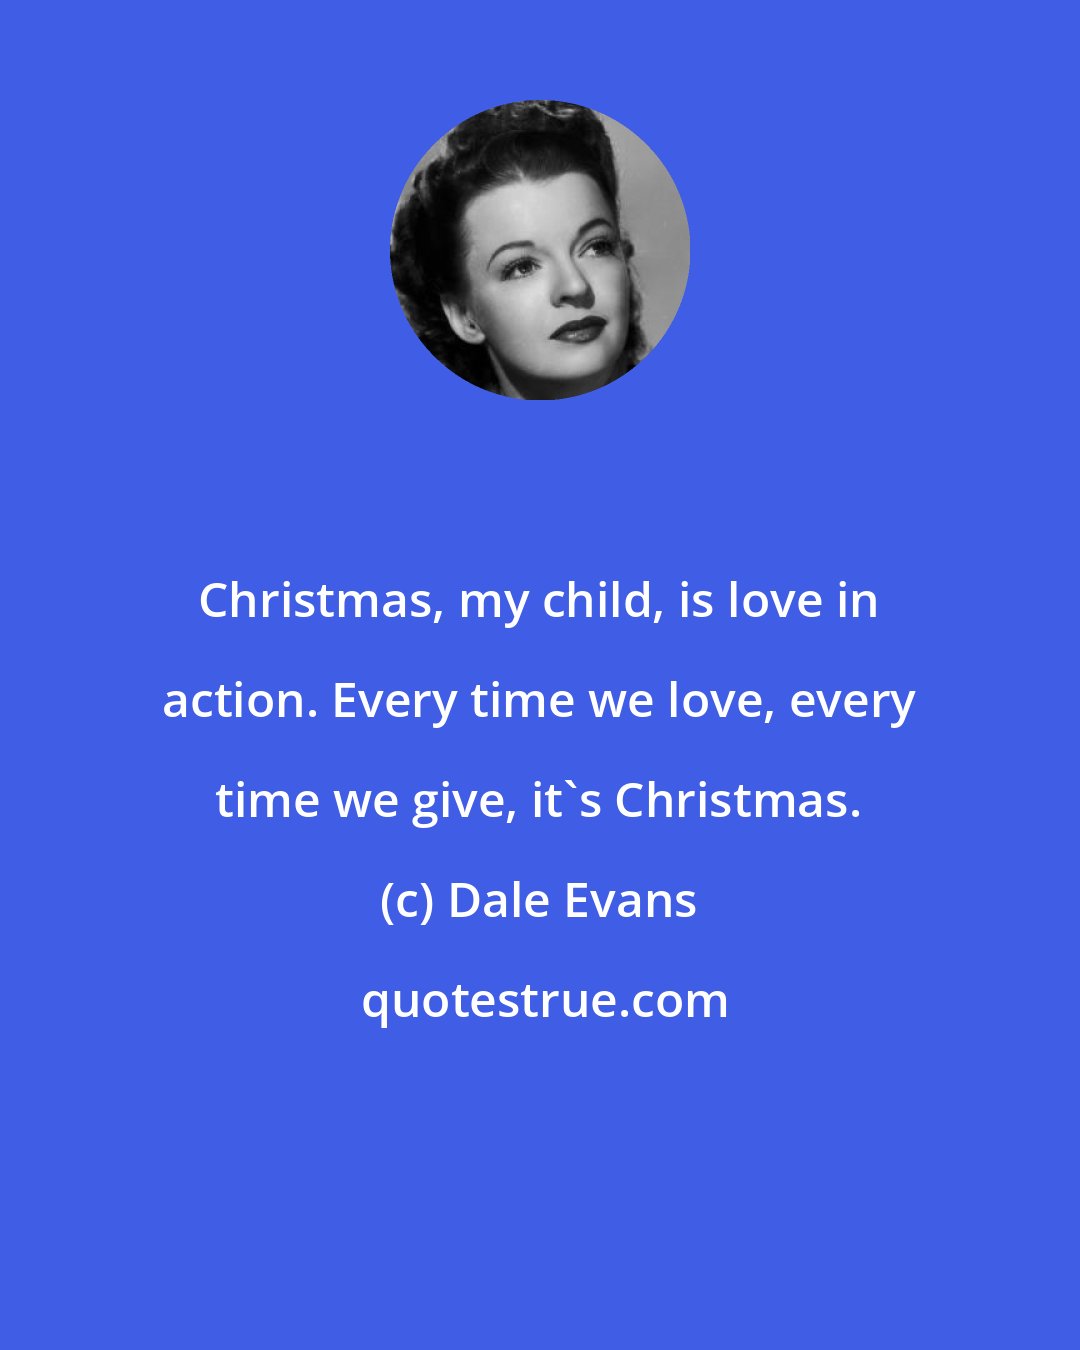 Dale Evans: Christmas, my child, is love in action. Every time we love, every time we give, it's Christmas.